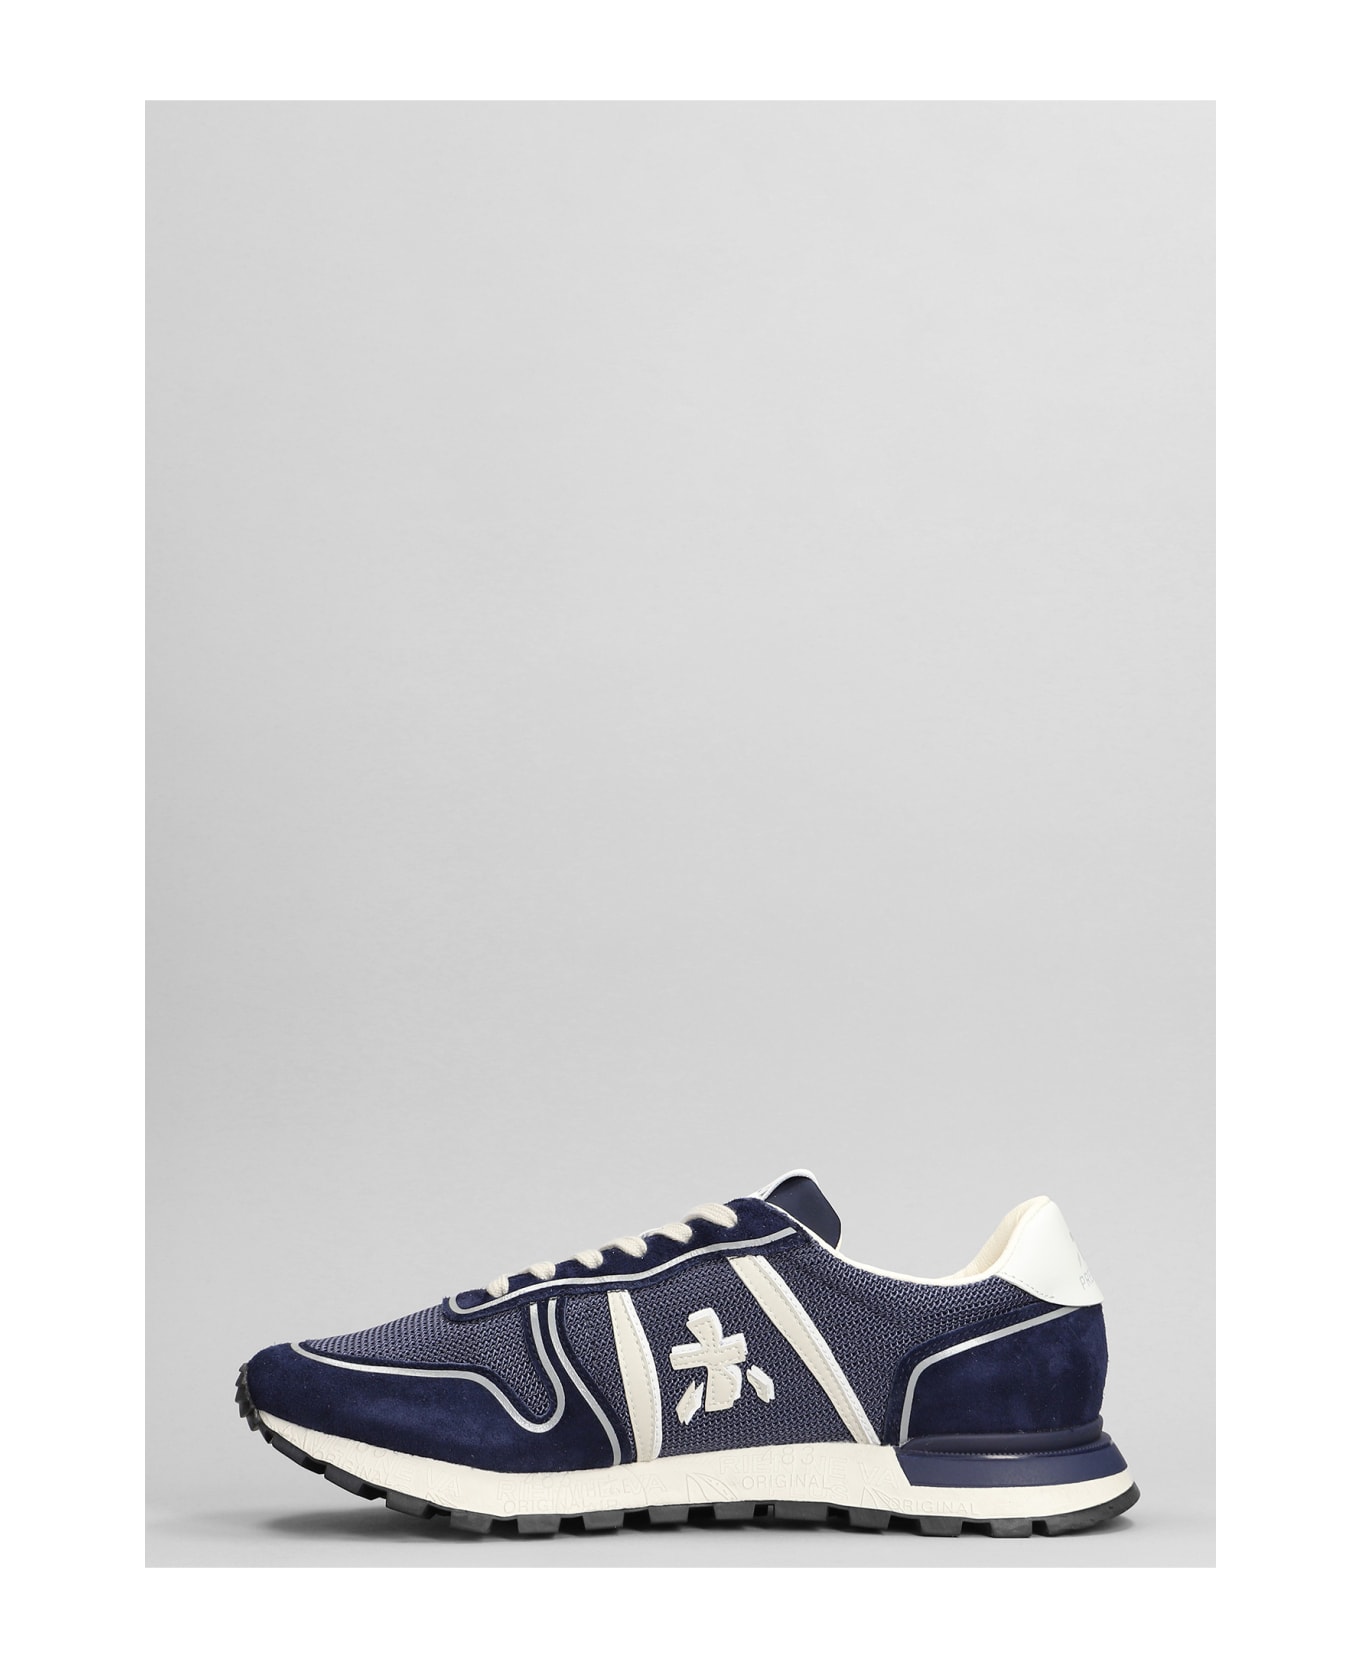 Premiata Ryan Sneakers In Blue Suede And Fabric - blue